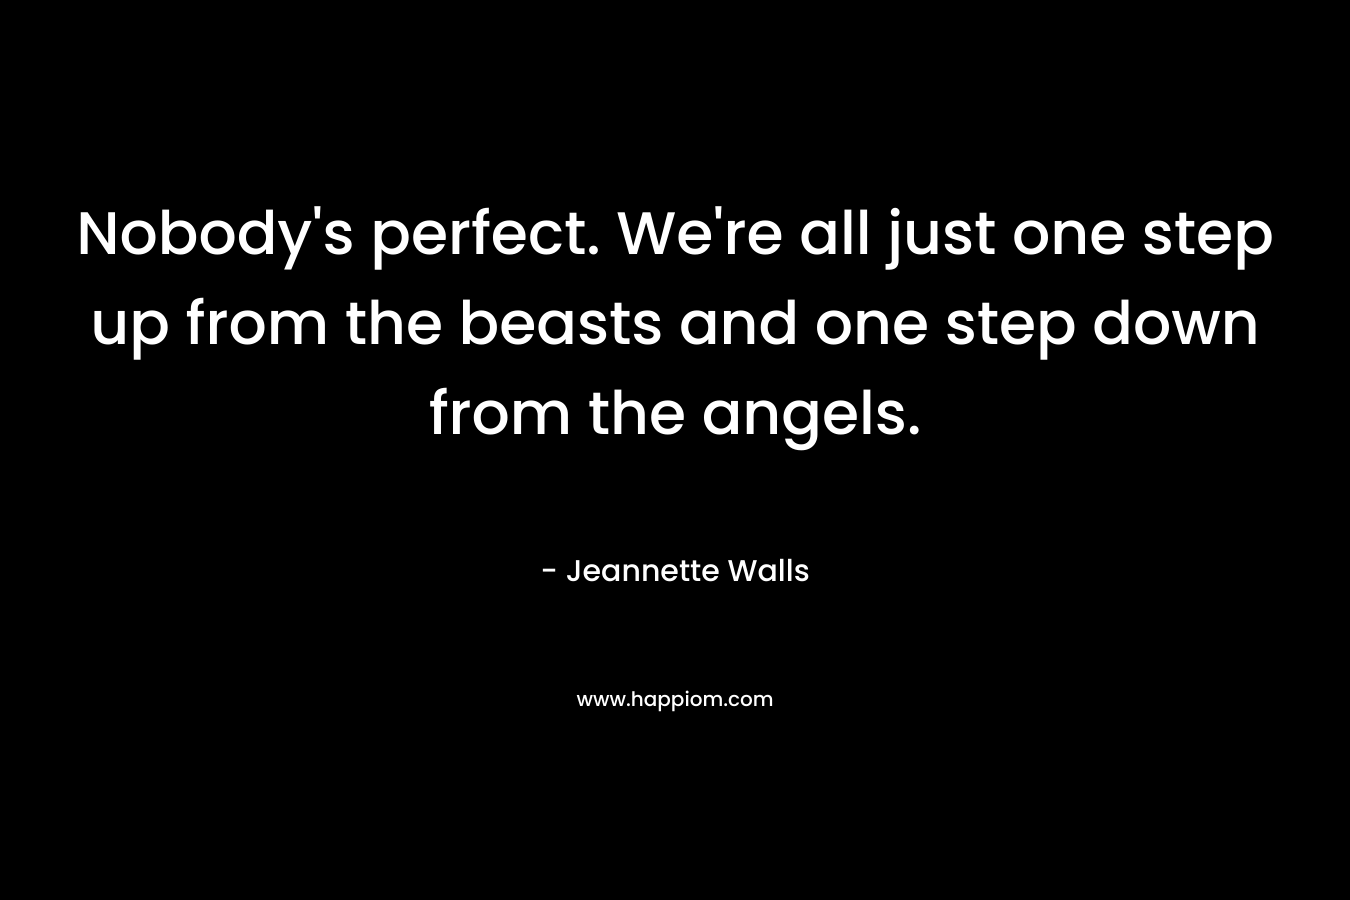 Nobody’s perfect. We’re all just one step up from the beasts and one step down from the angels. – Jeannette Walls